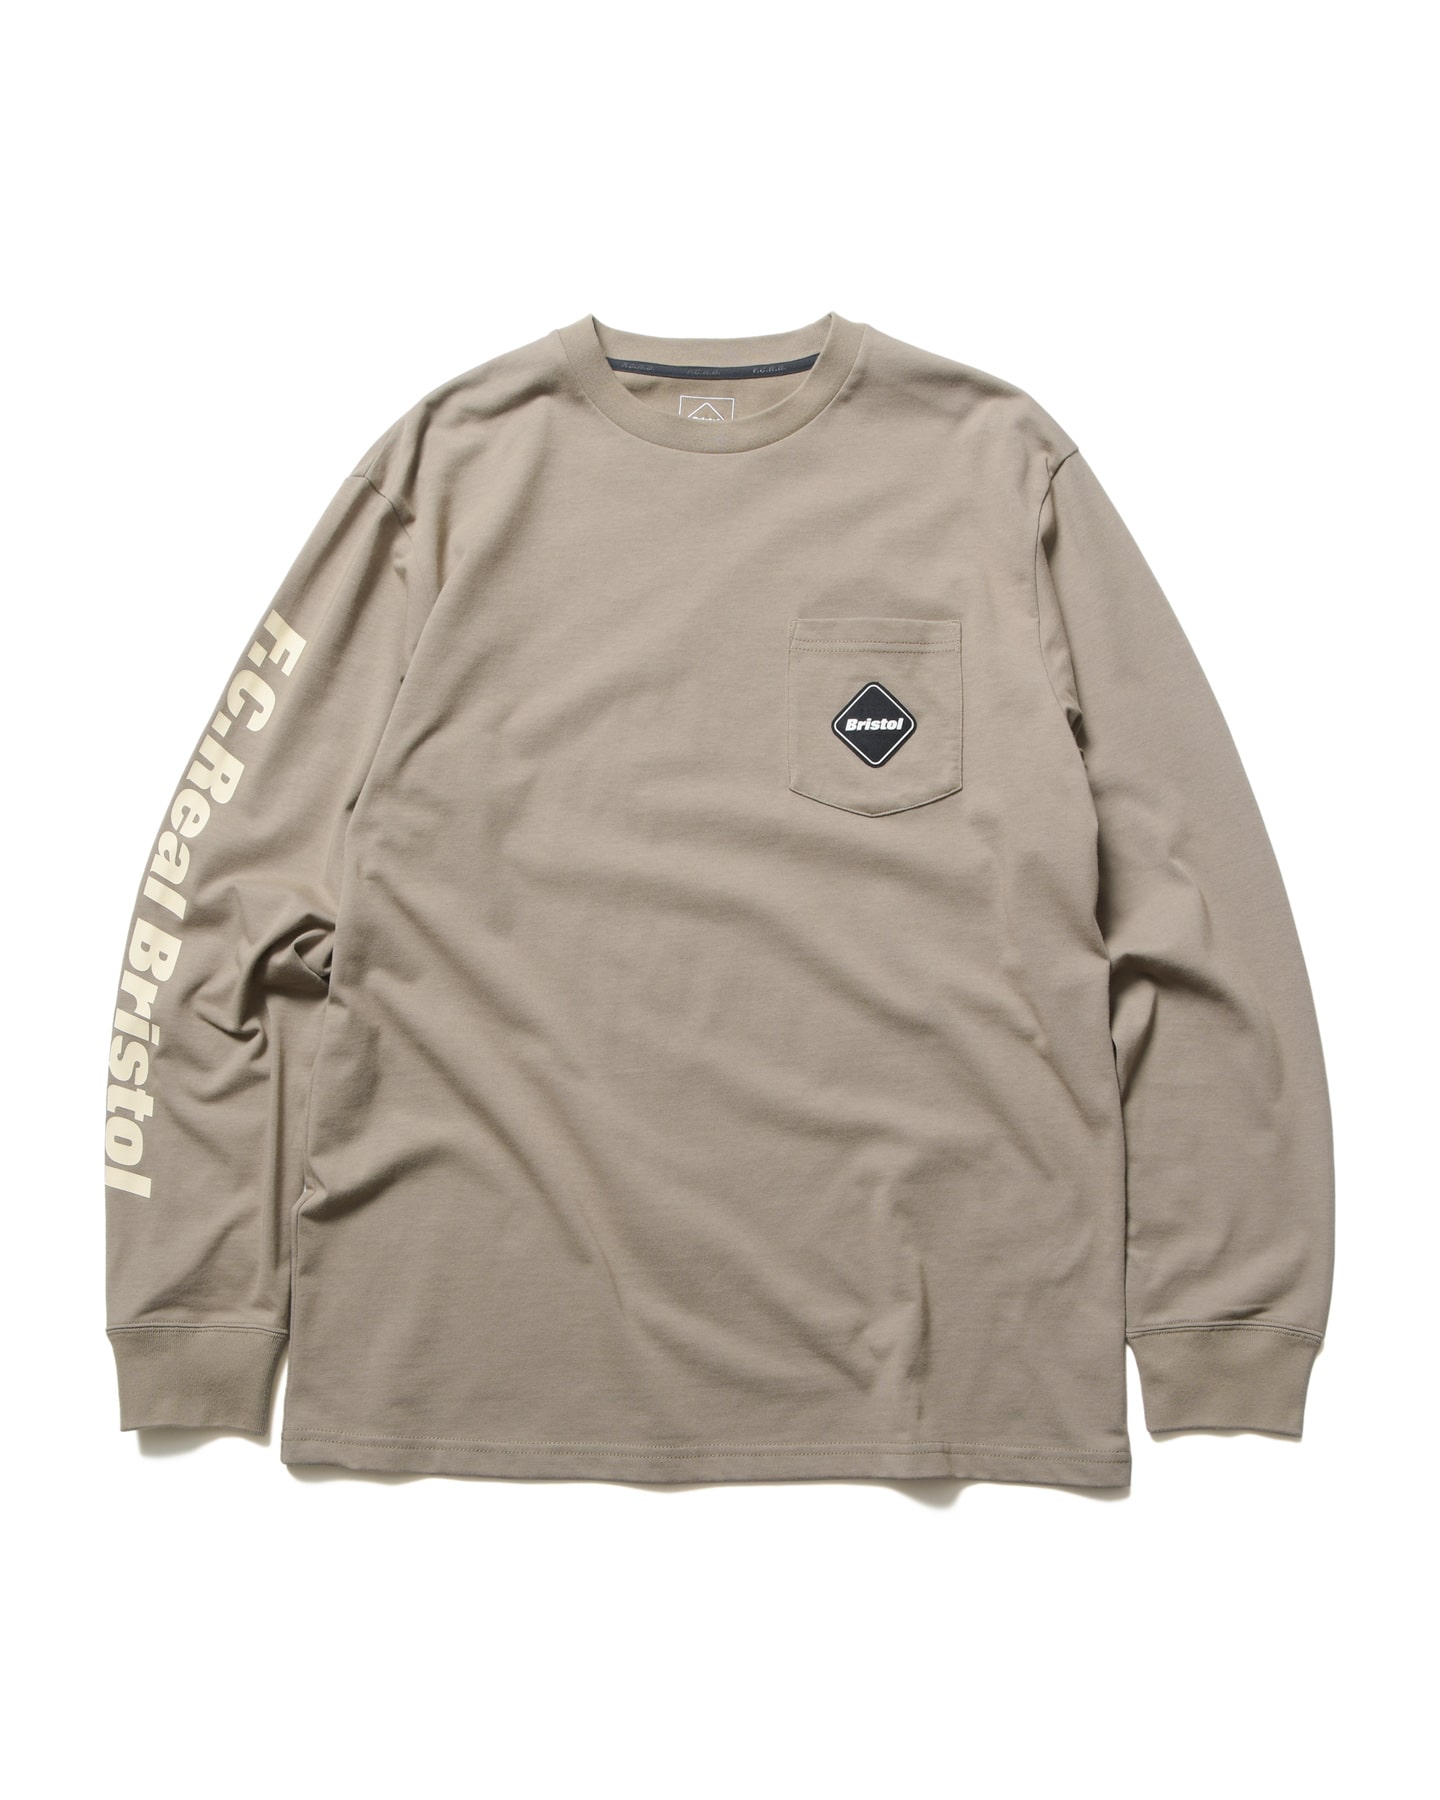 FCRB L/S AUTHENTIC TEAM POCKET TEE-